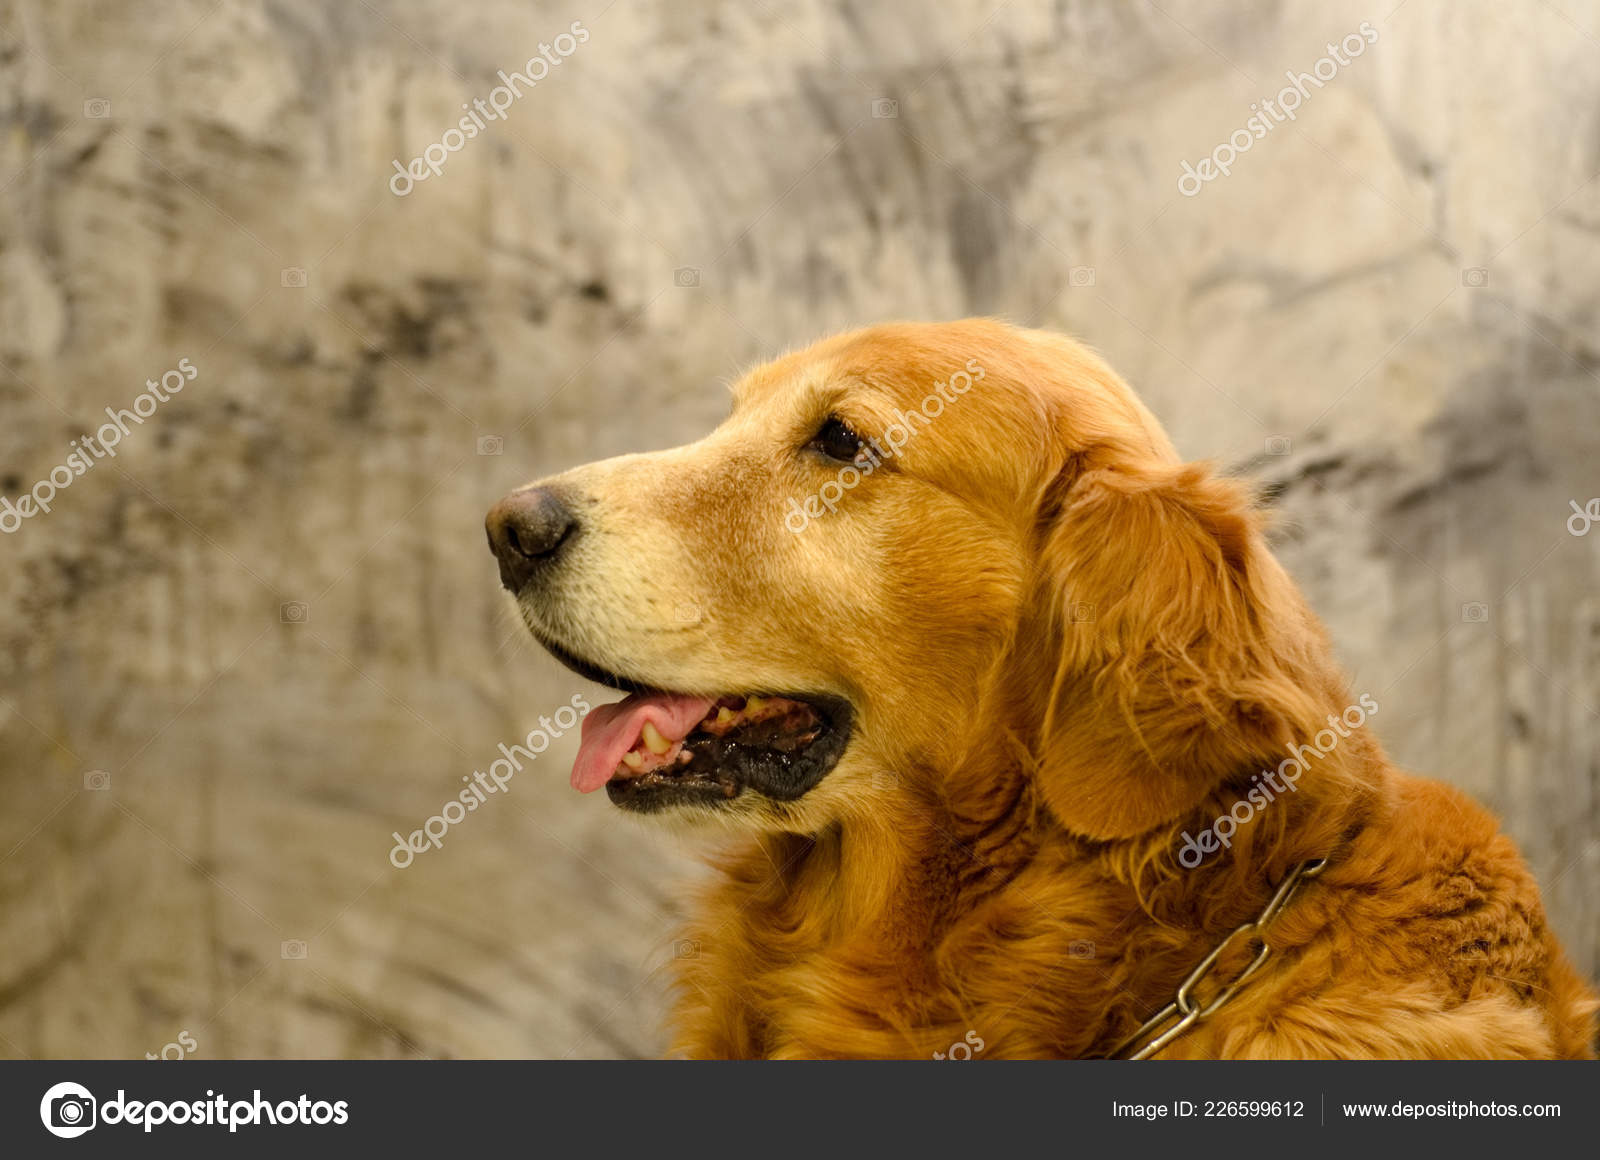 Side View Close Picture Golden Retriever Dog Breed Sitting Front Stock Photo Image By C 3baddogsk Gmail Com 226599612